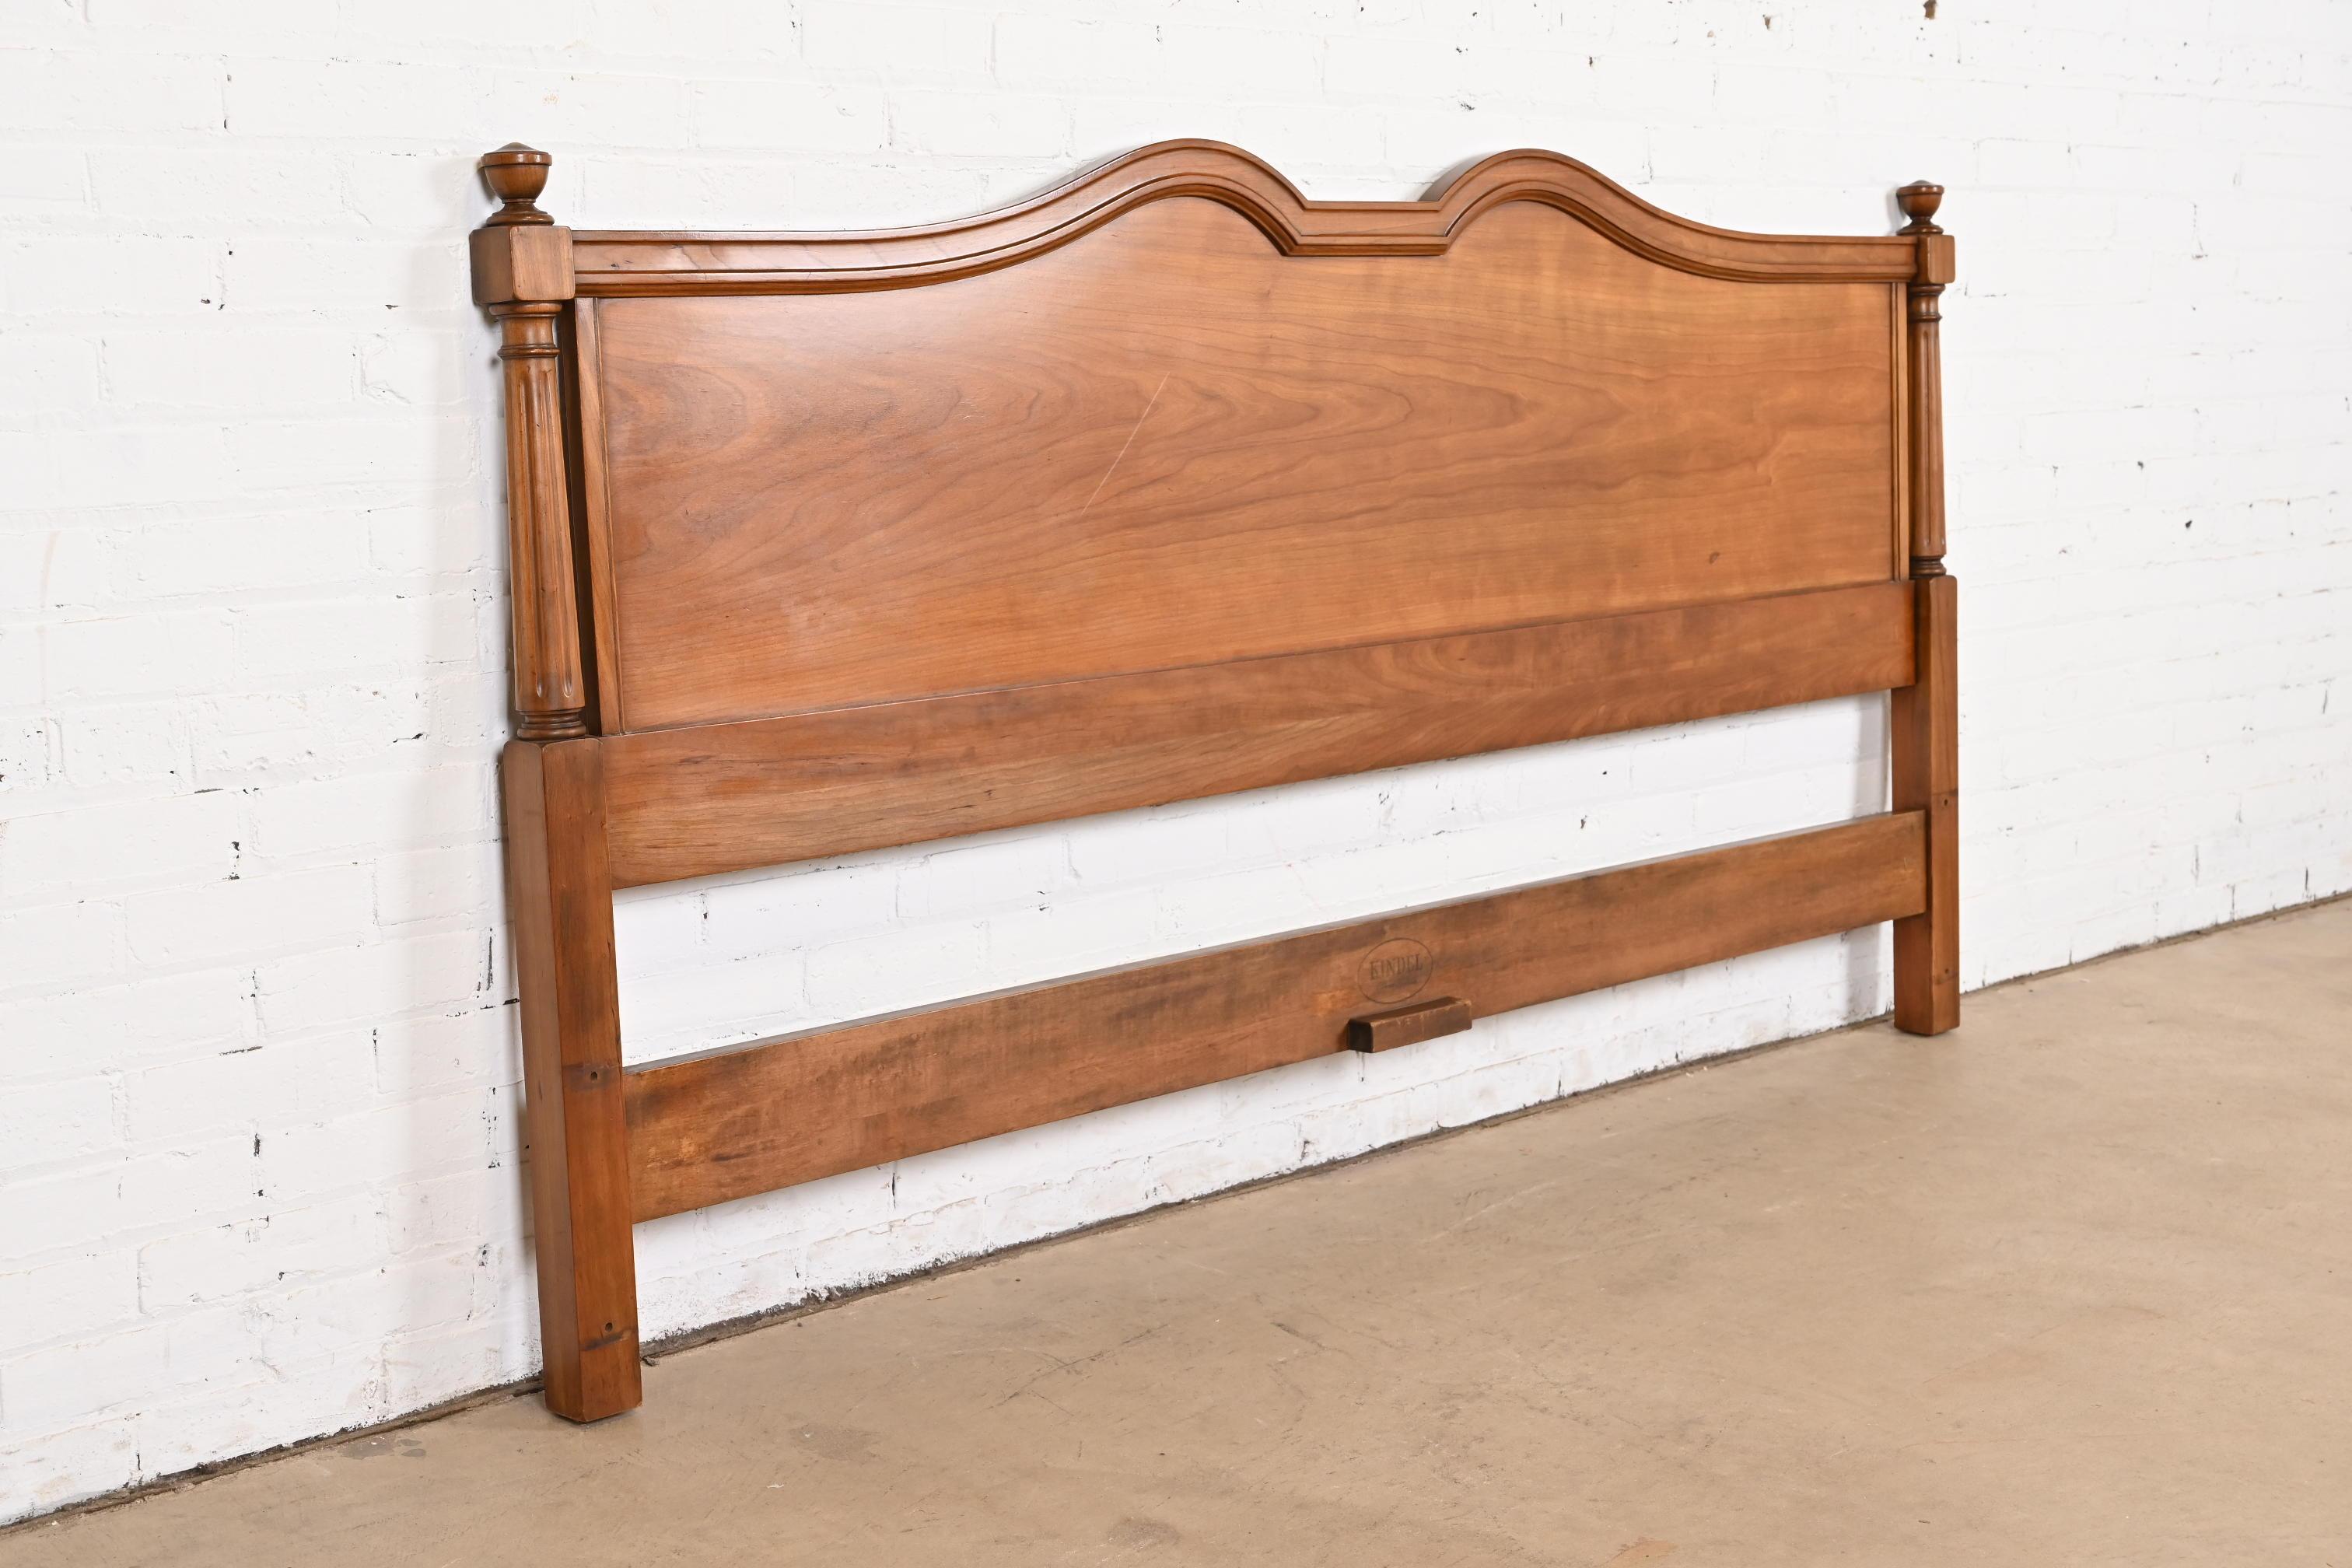 Kindel Furniture French Provincial Louis XV Cherry Wood King Size Headboard In Good Condition For Sale In South Bend, IN